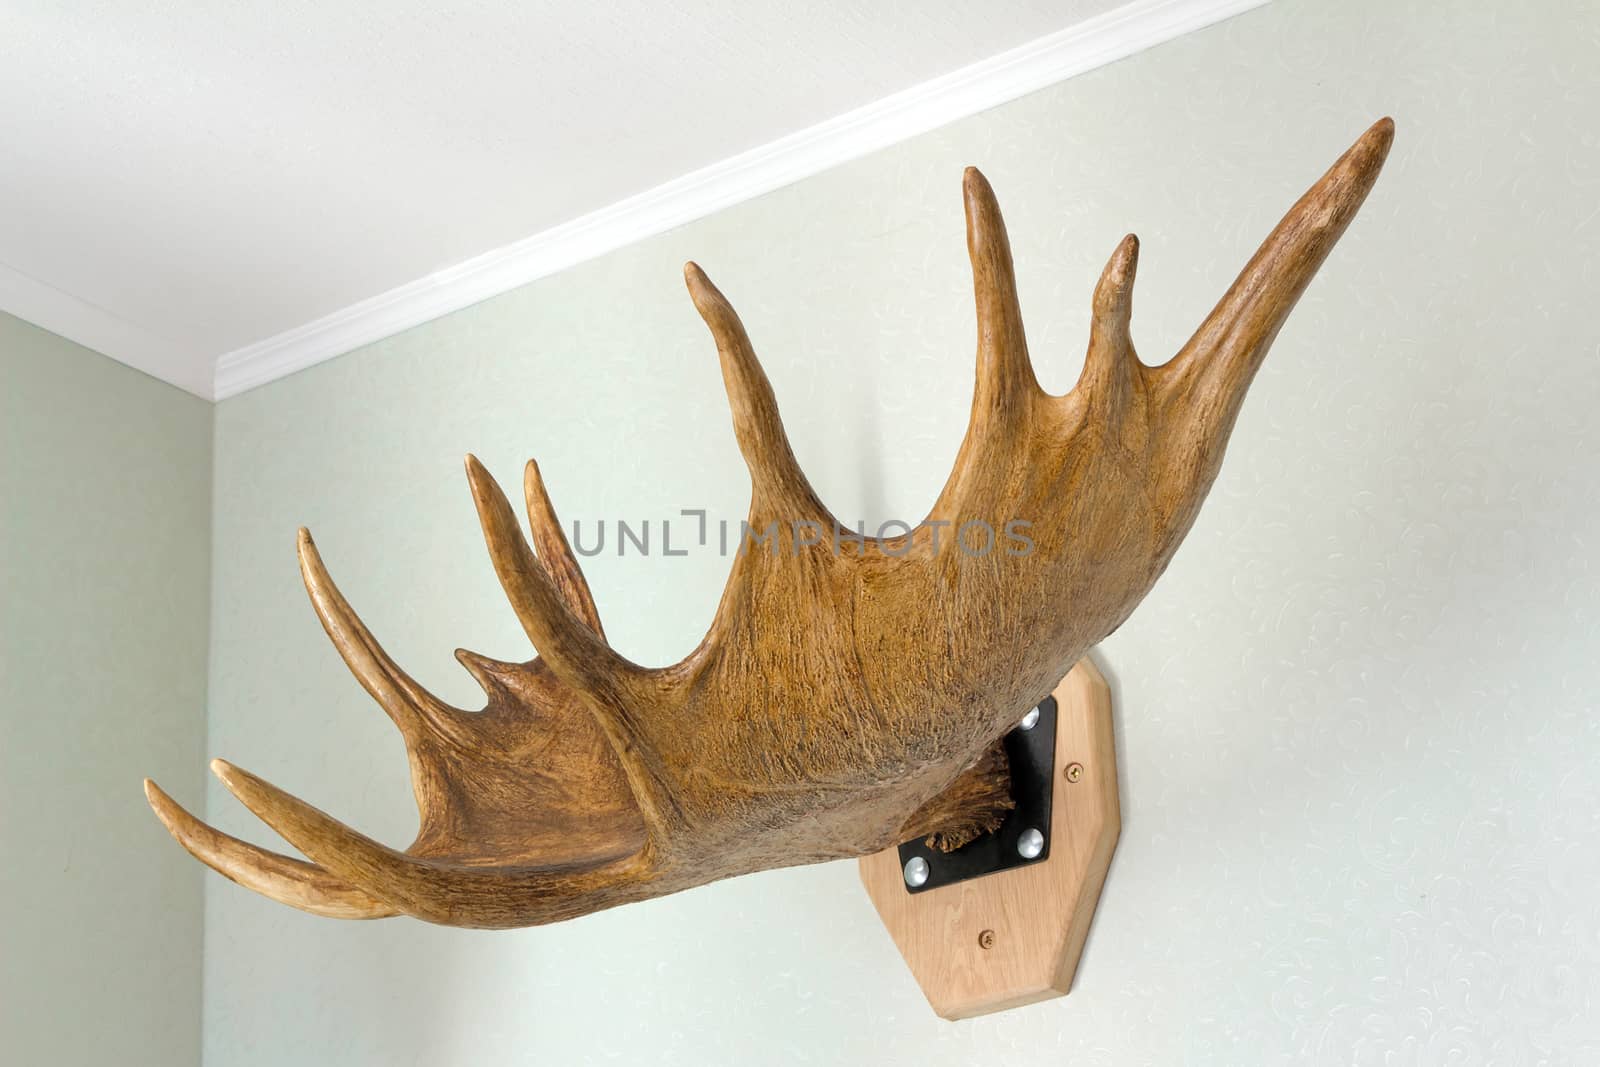 The big horn of an elk strengthened on a wall as a detail of an interior.